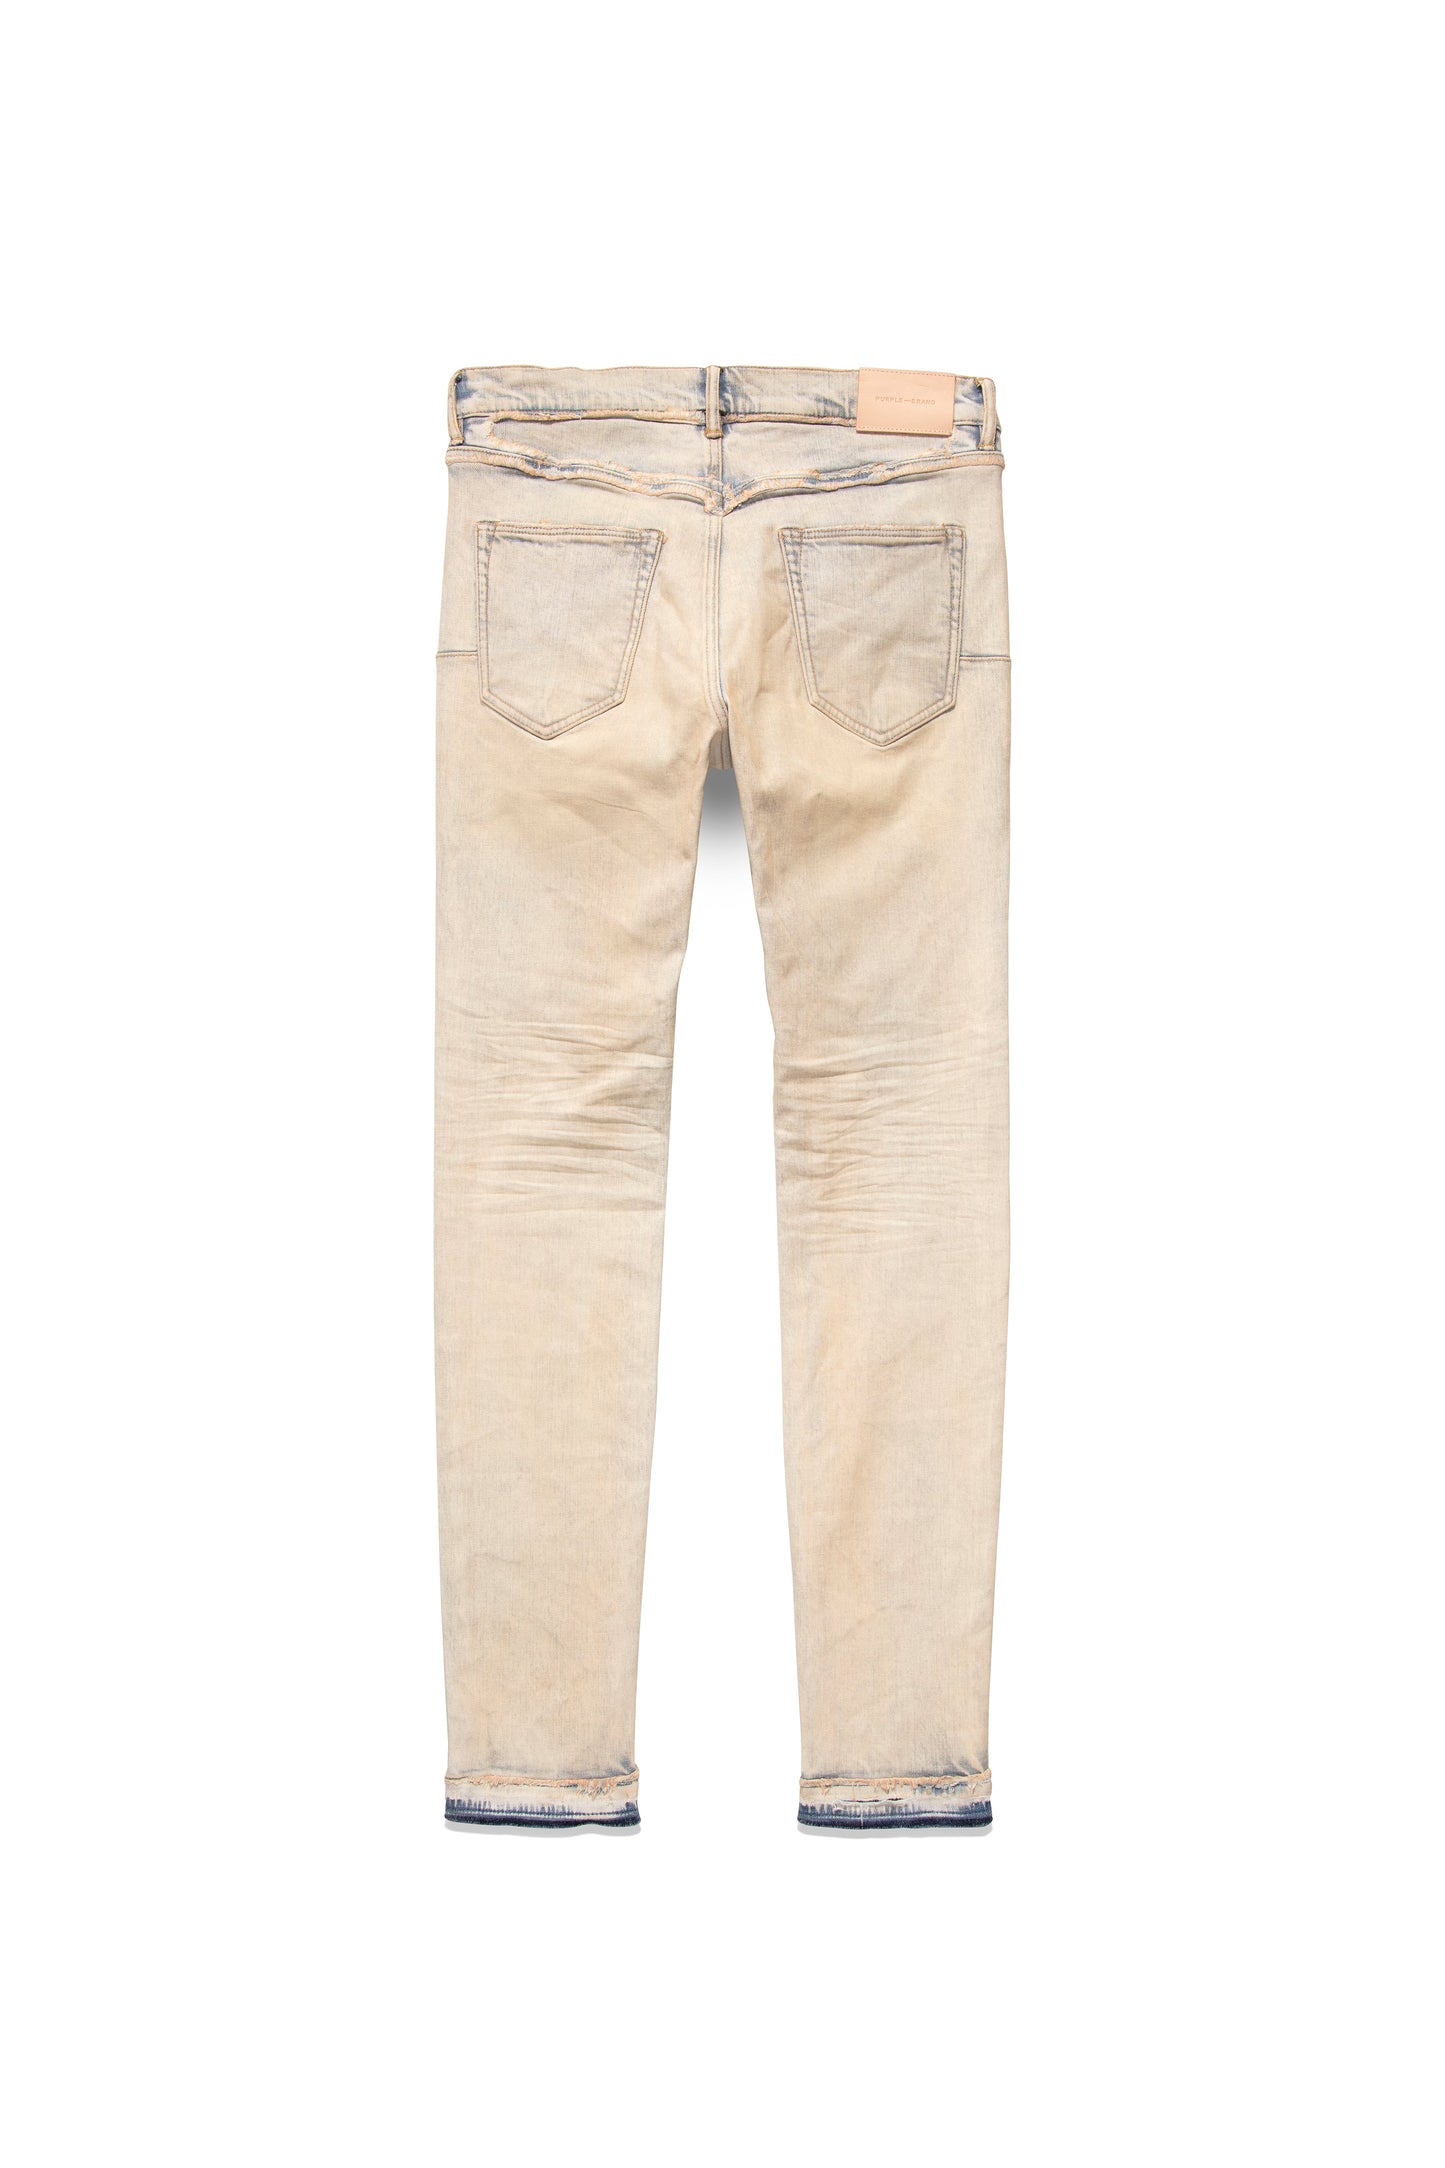 P001 LOW RISE SKINNY JEAN - Faded & Tinted Indigo Fray